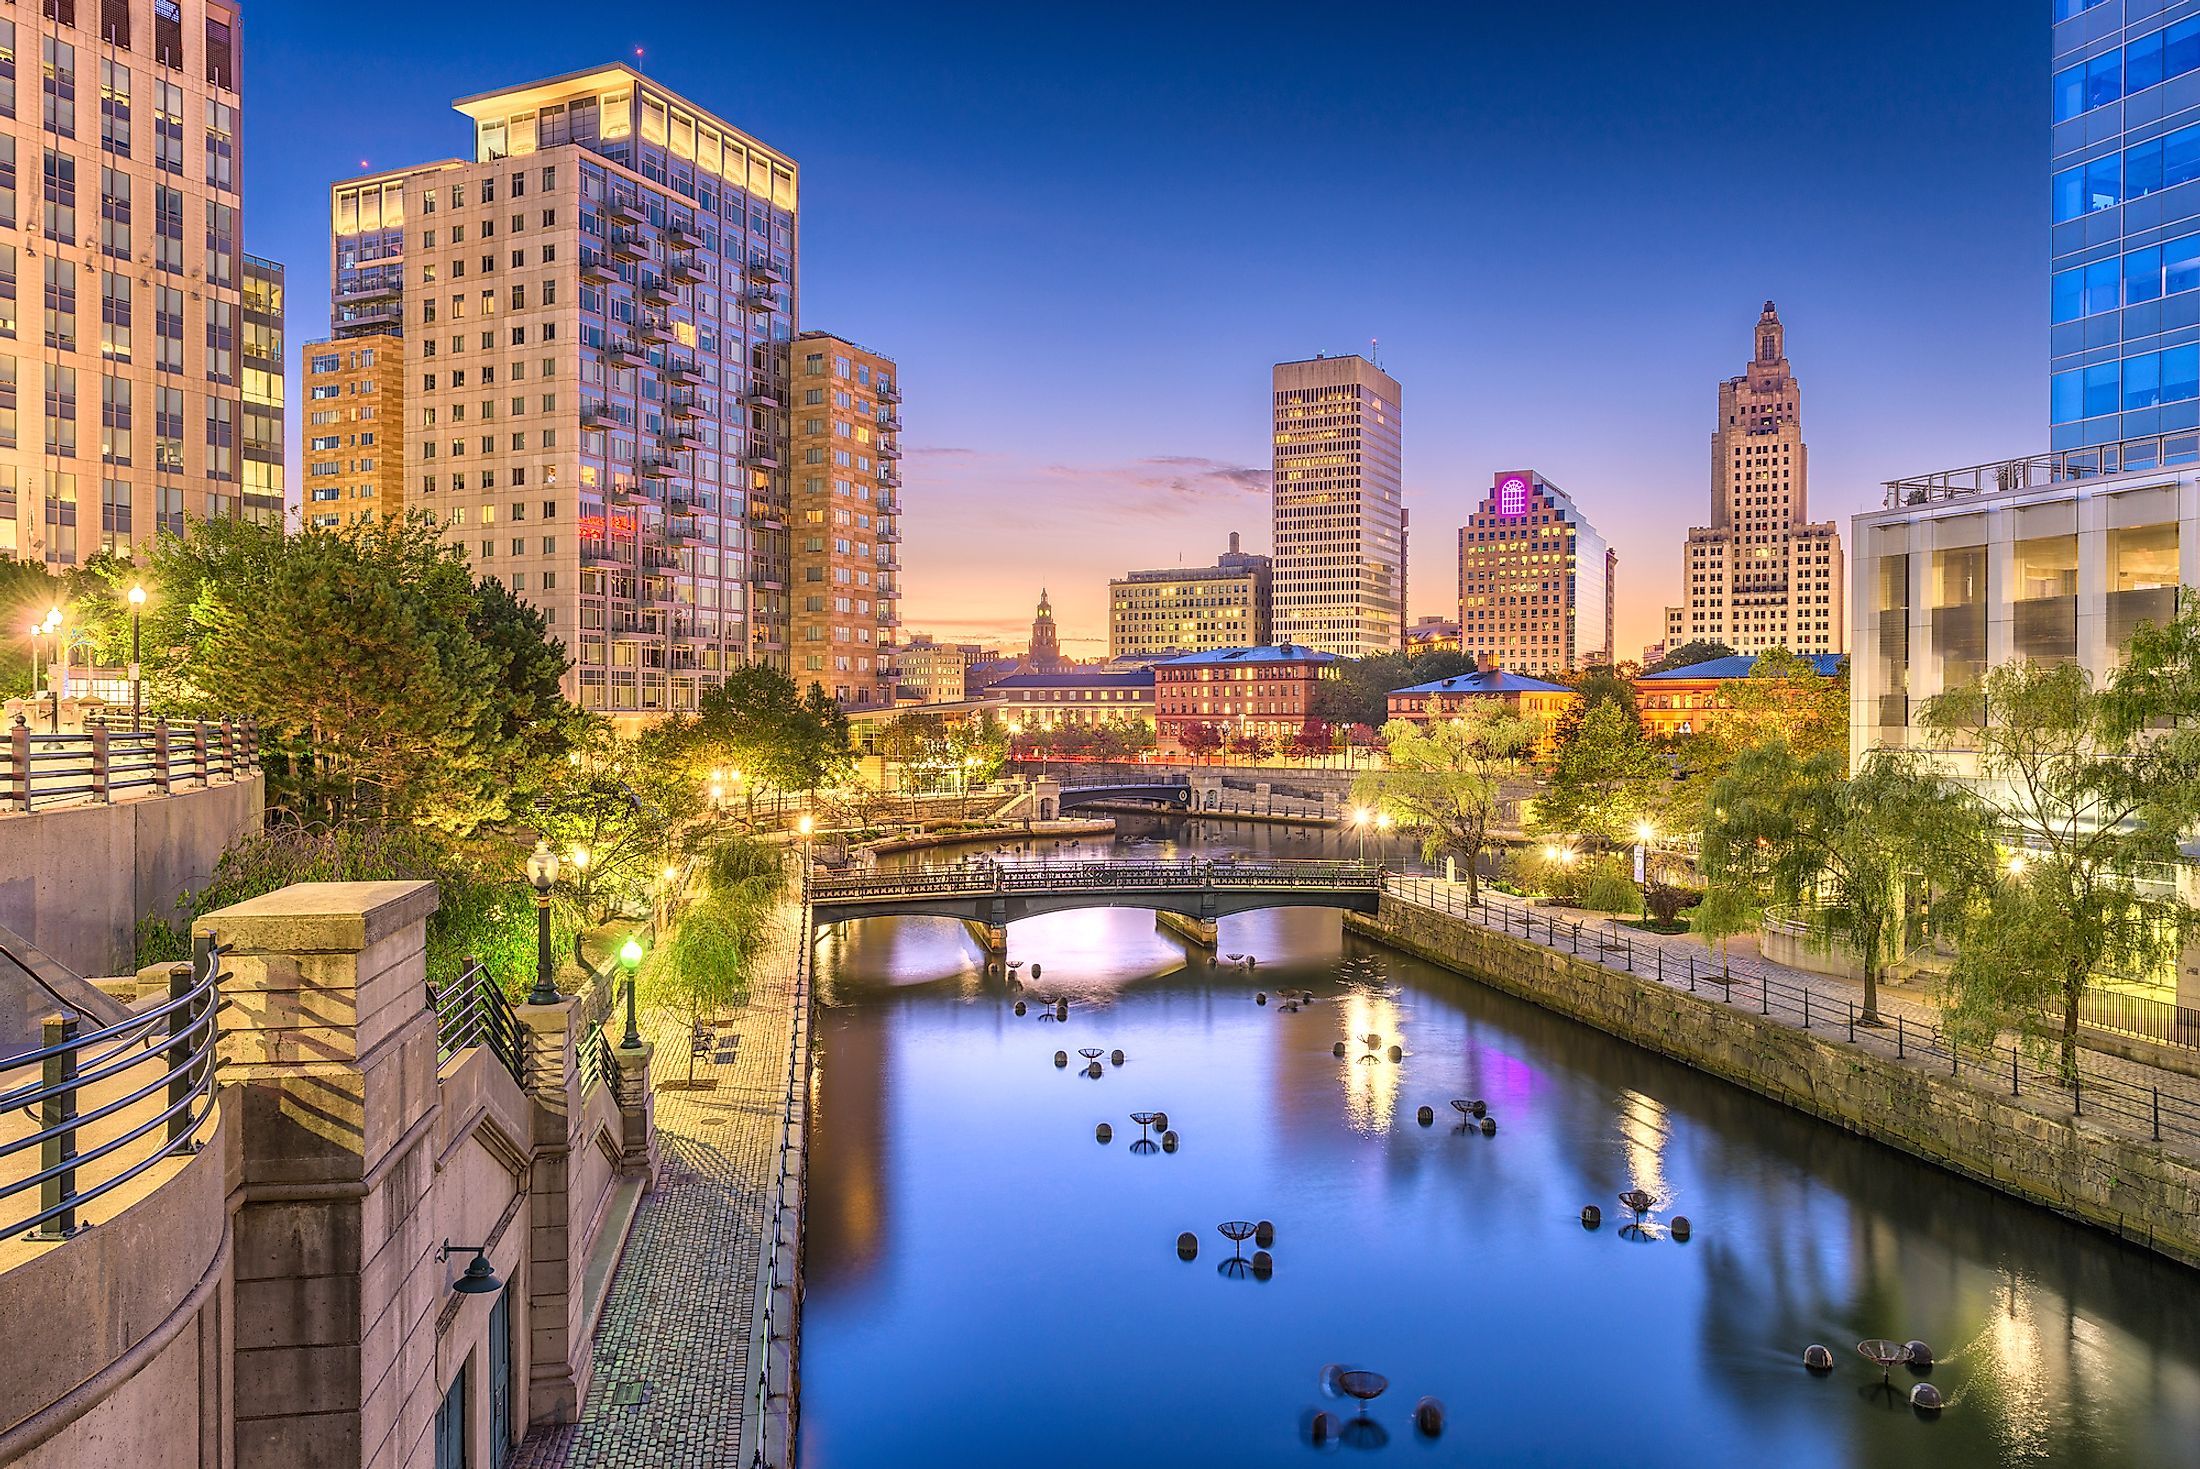 The gorgeous city of Providence, Rhode Island.